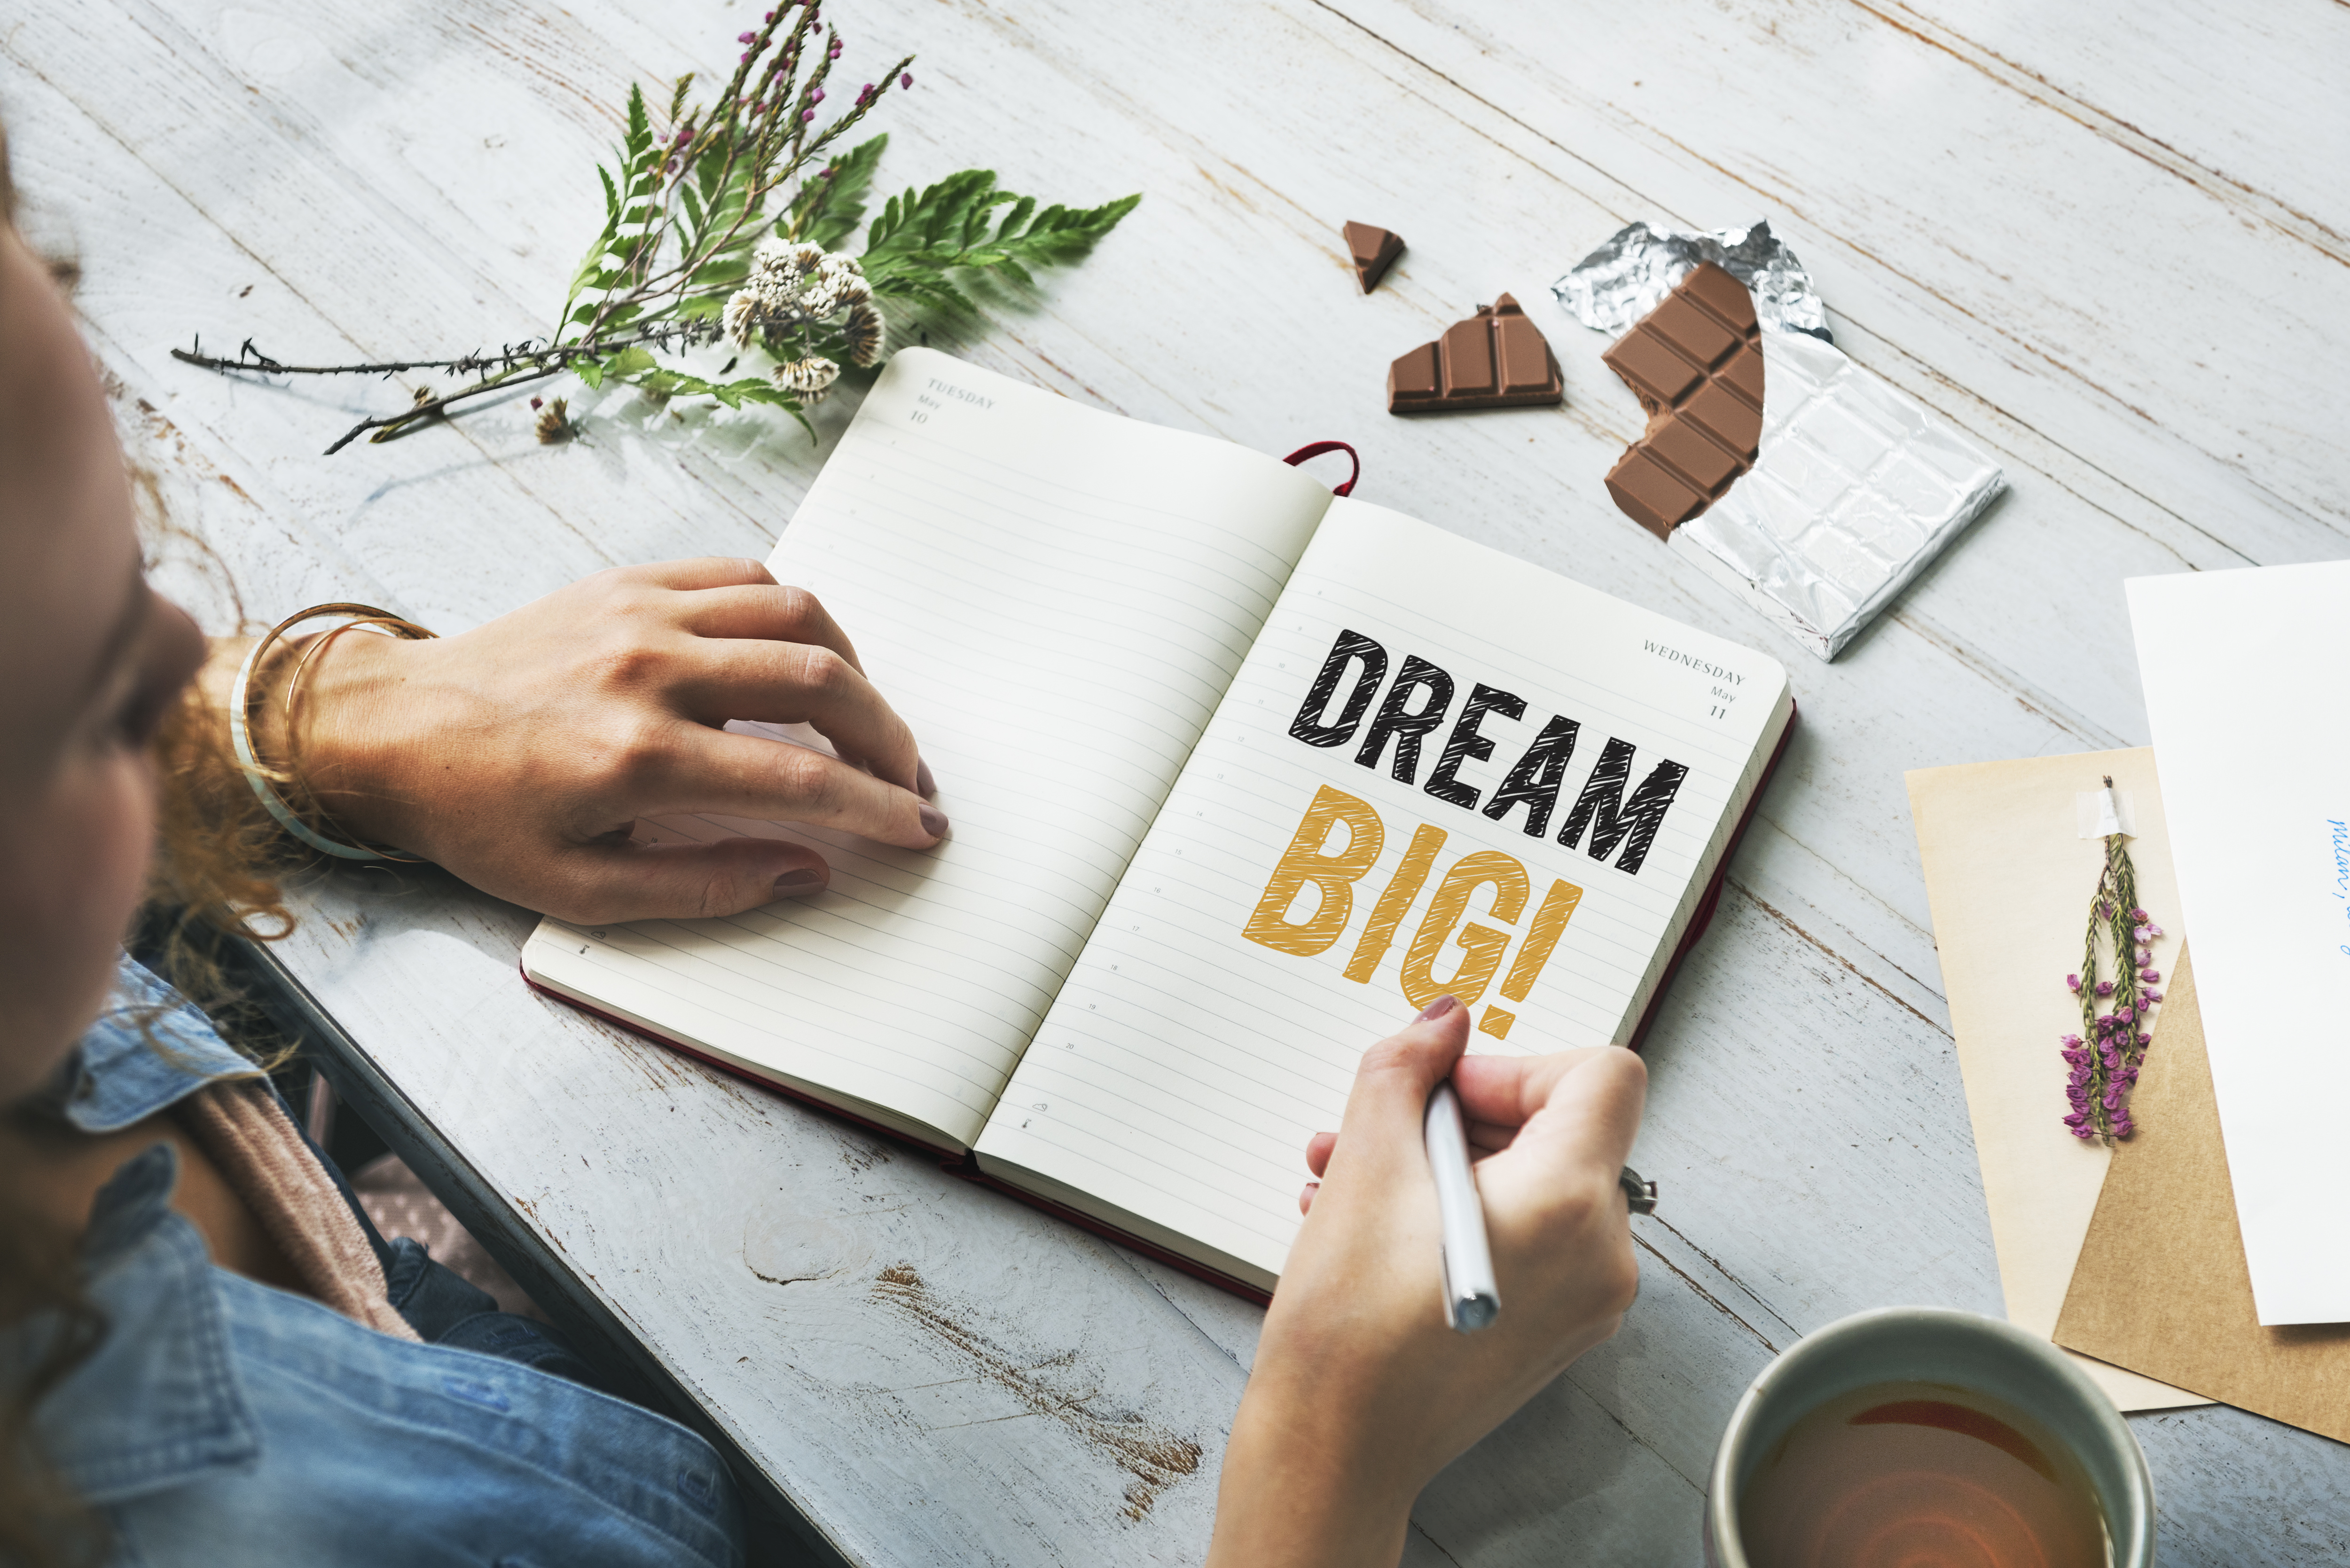 Woman writing Dream big on a notebook